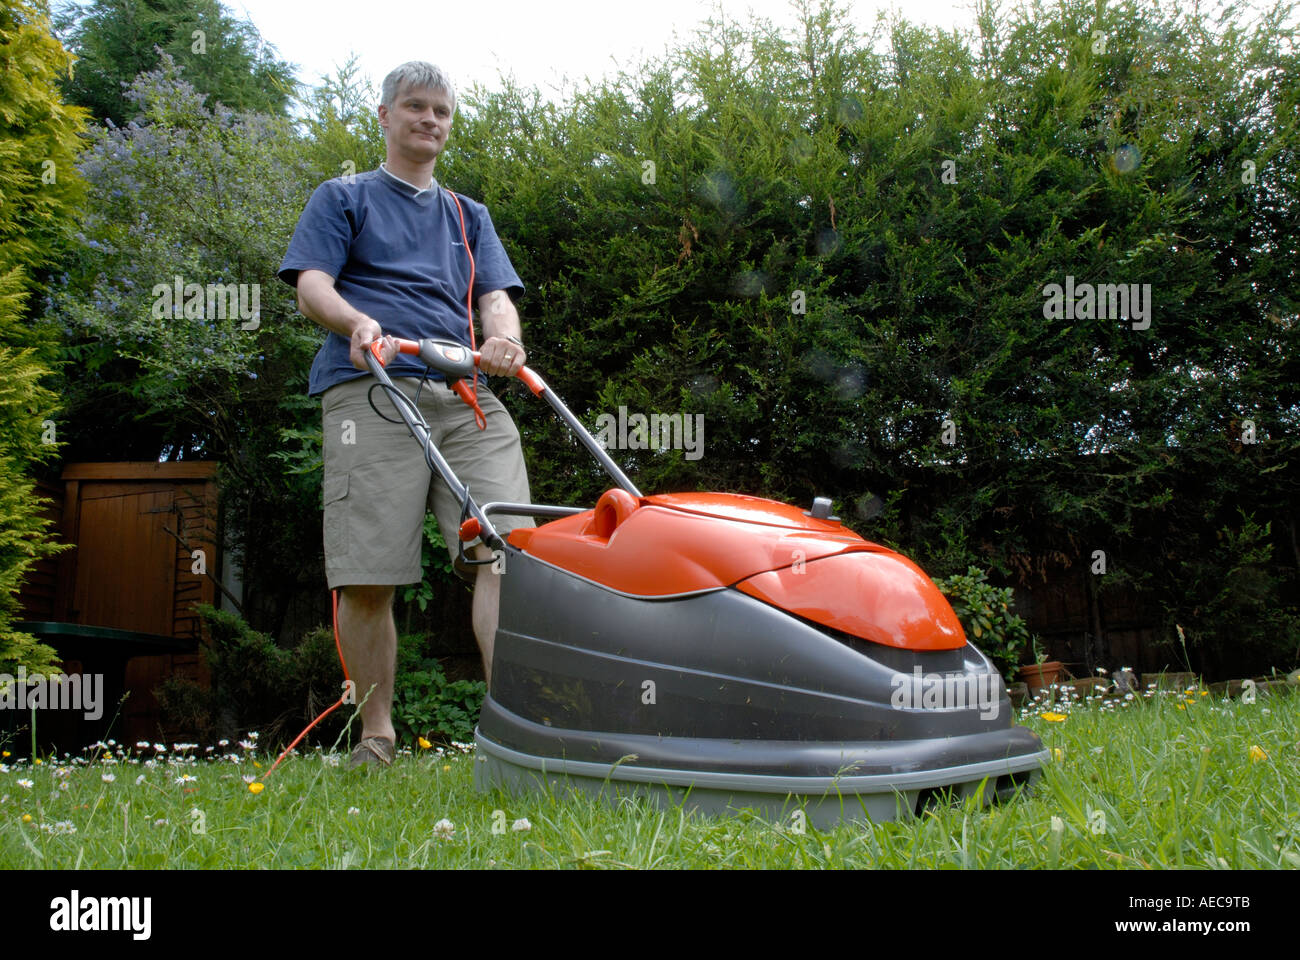 Man Cutting Lawn with Flymo Lawnmower Stock Photo